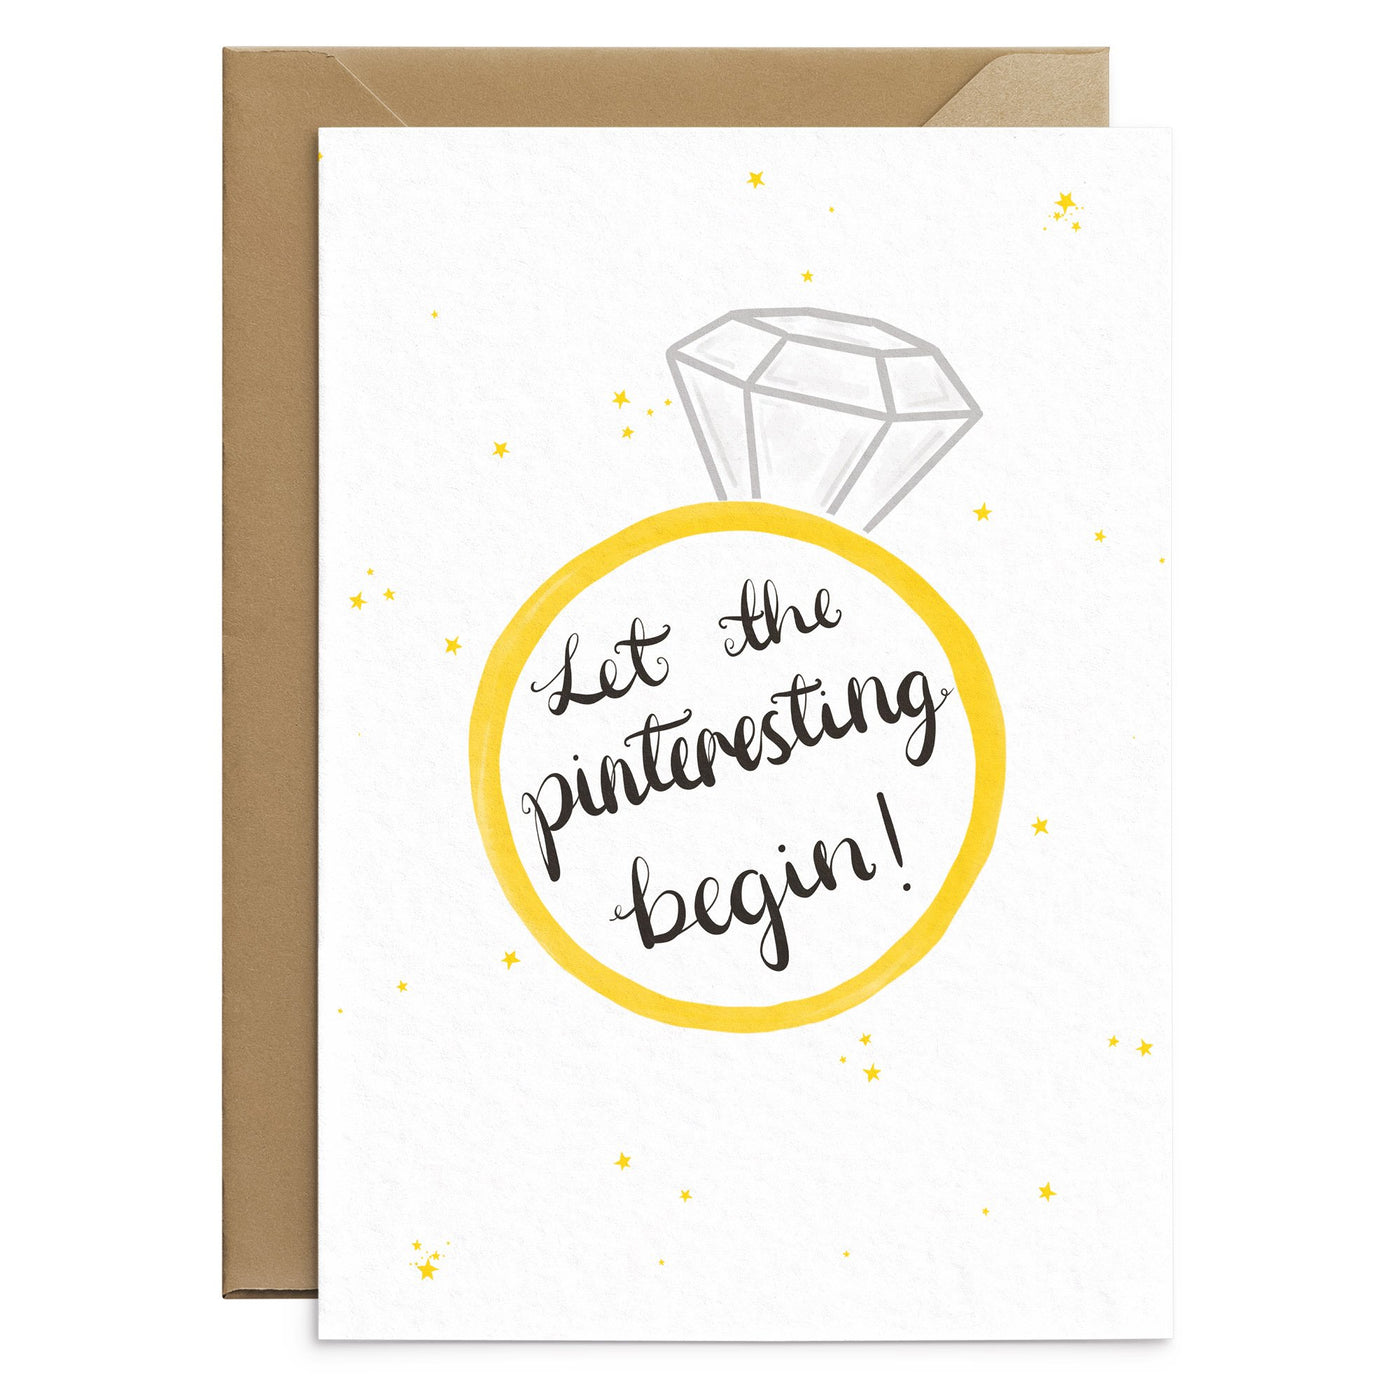 Funny Pinterest Engagement Card - Poppins & Co.